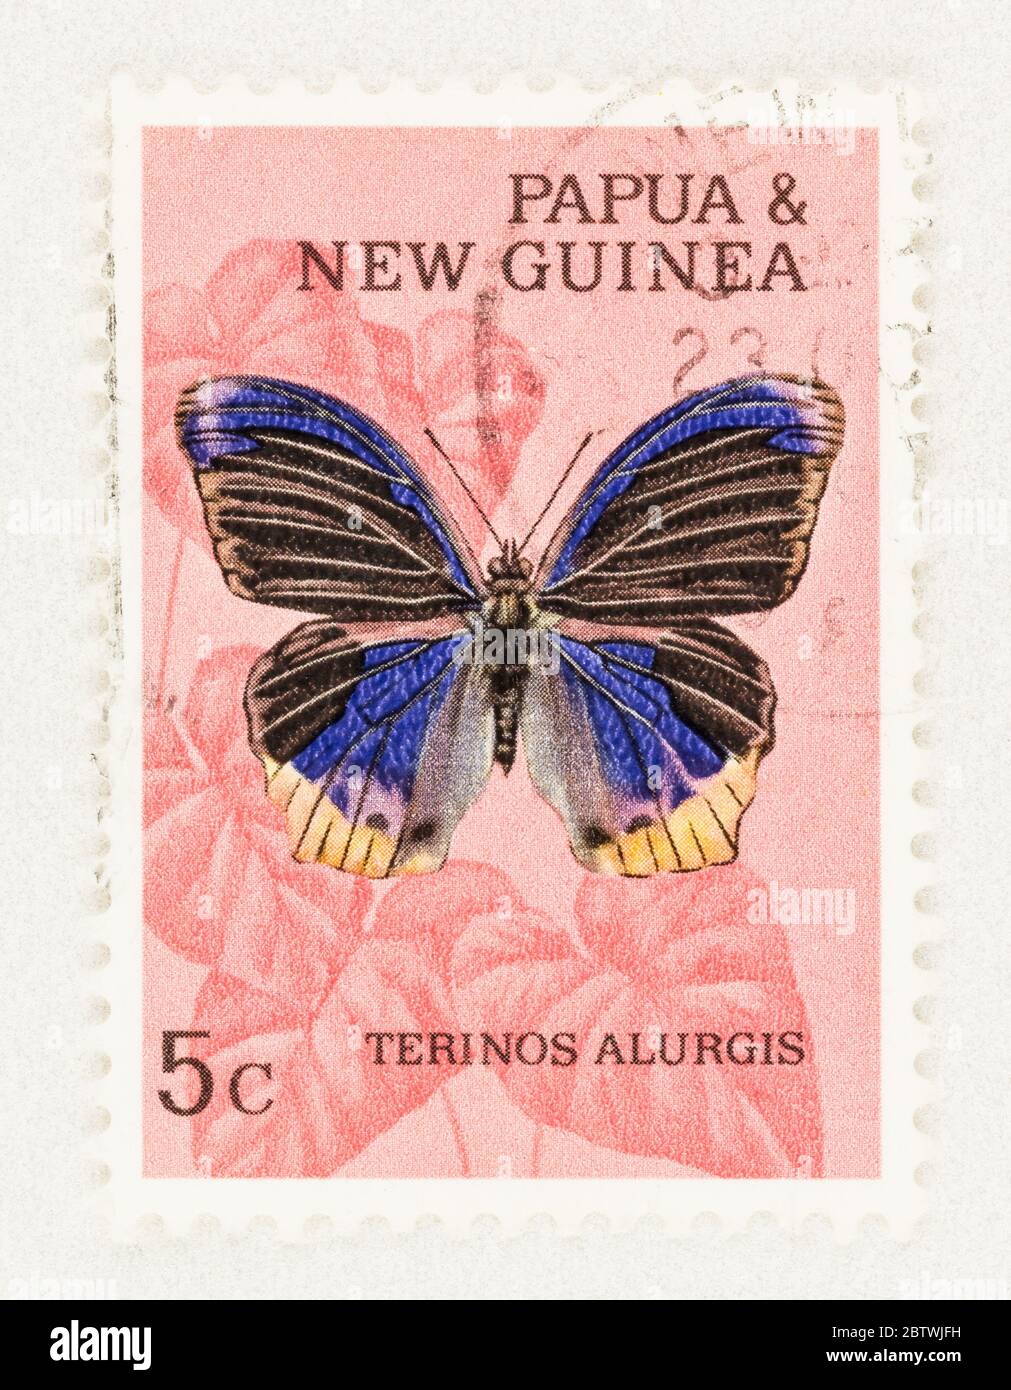 SEATTLE WASHINGTON - May 25, 2020:   Papua and New Guinea stamp featuring Terinos alurgis, a Nymphalid  butterfly. Scott # 212 Stock Photo